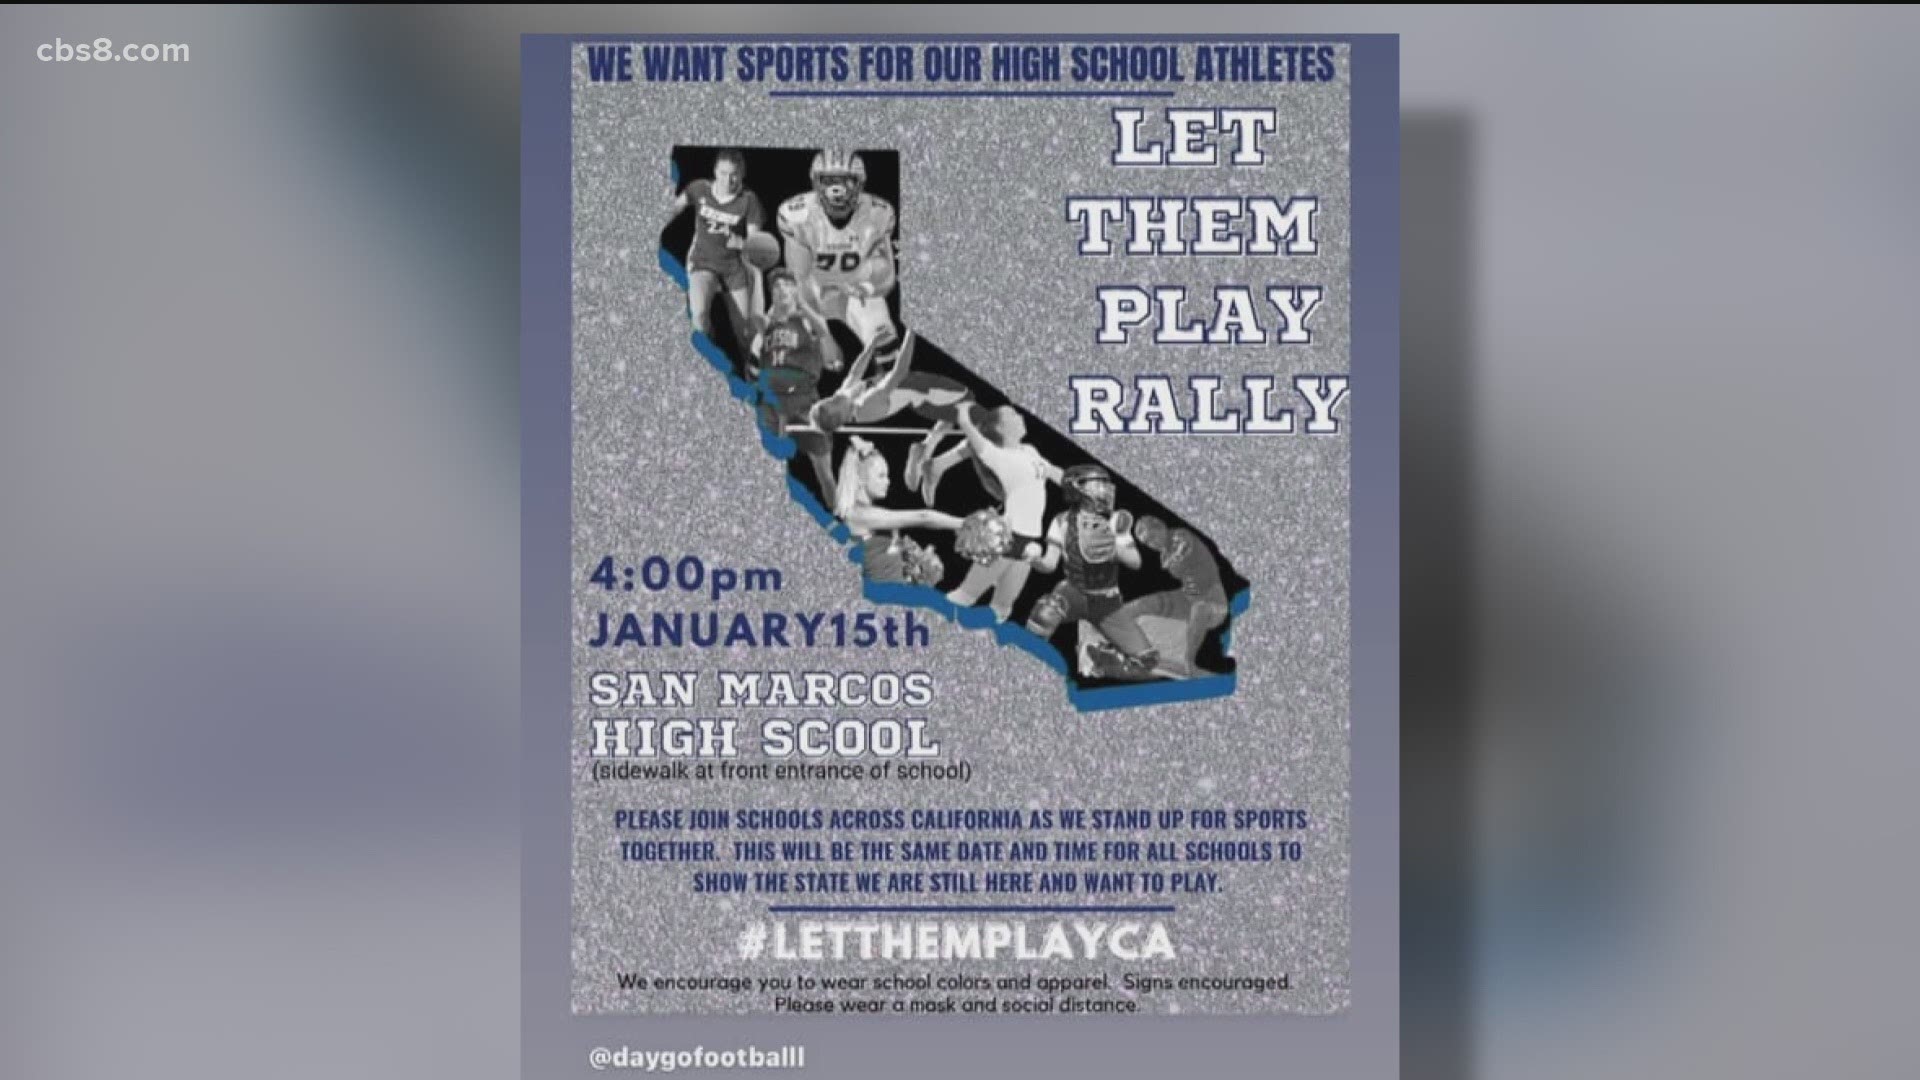 On Friday there will be rallies held across the state including some in San Diego to call on Governor Gavin Newsom to allow sports to resume in the state.